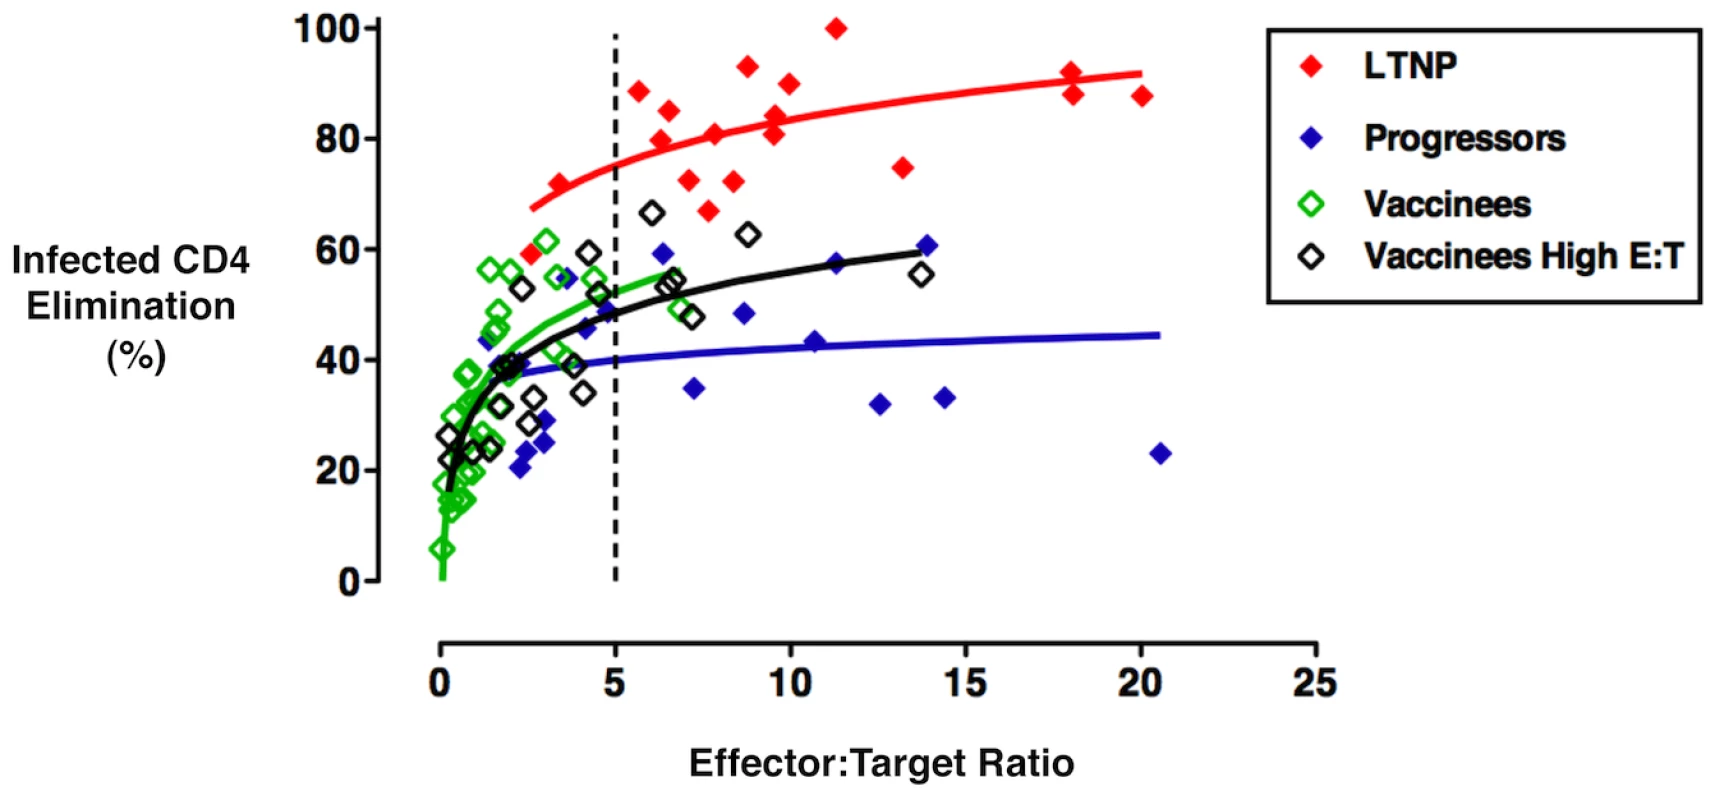 The HIV-specific CD8<sup><b>+</b></sup> T-cells of Ad5/HIV vaccinees exhibited per-cell cytotoxic capacity that was significantly lower than that of LTNP but only somewhat higher than that of progressors.